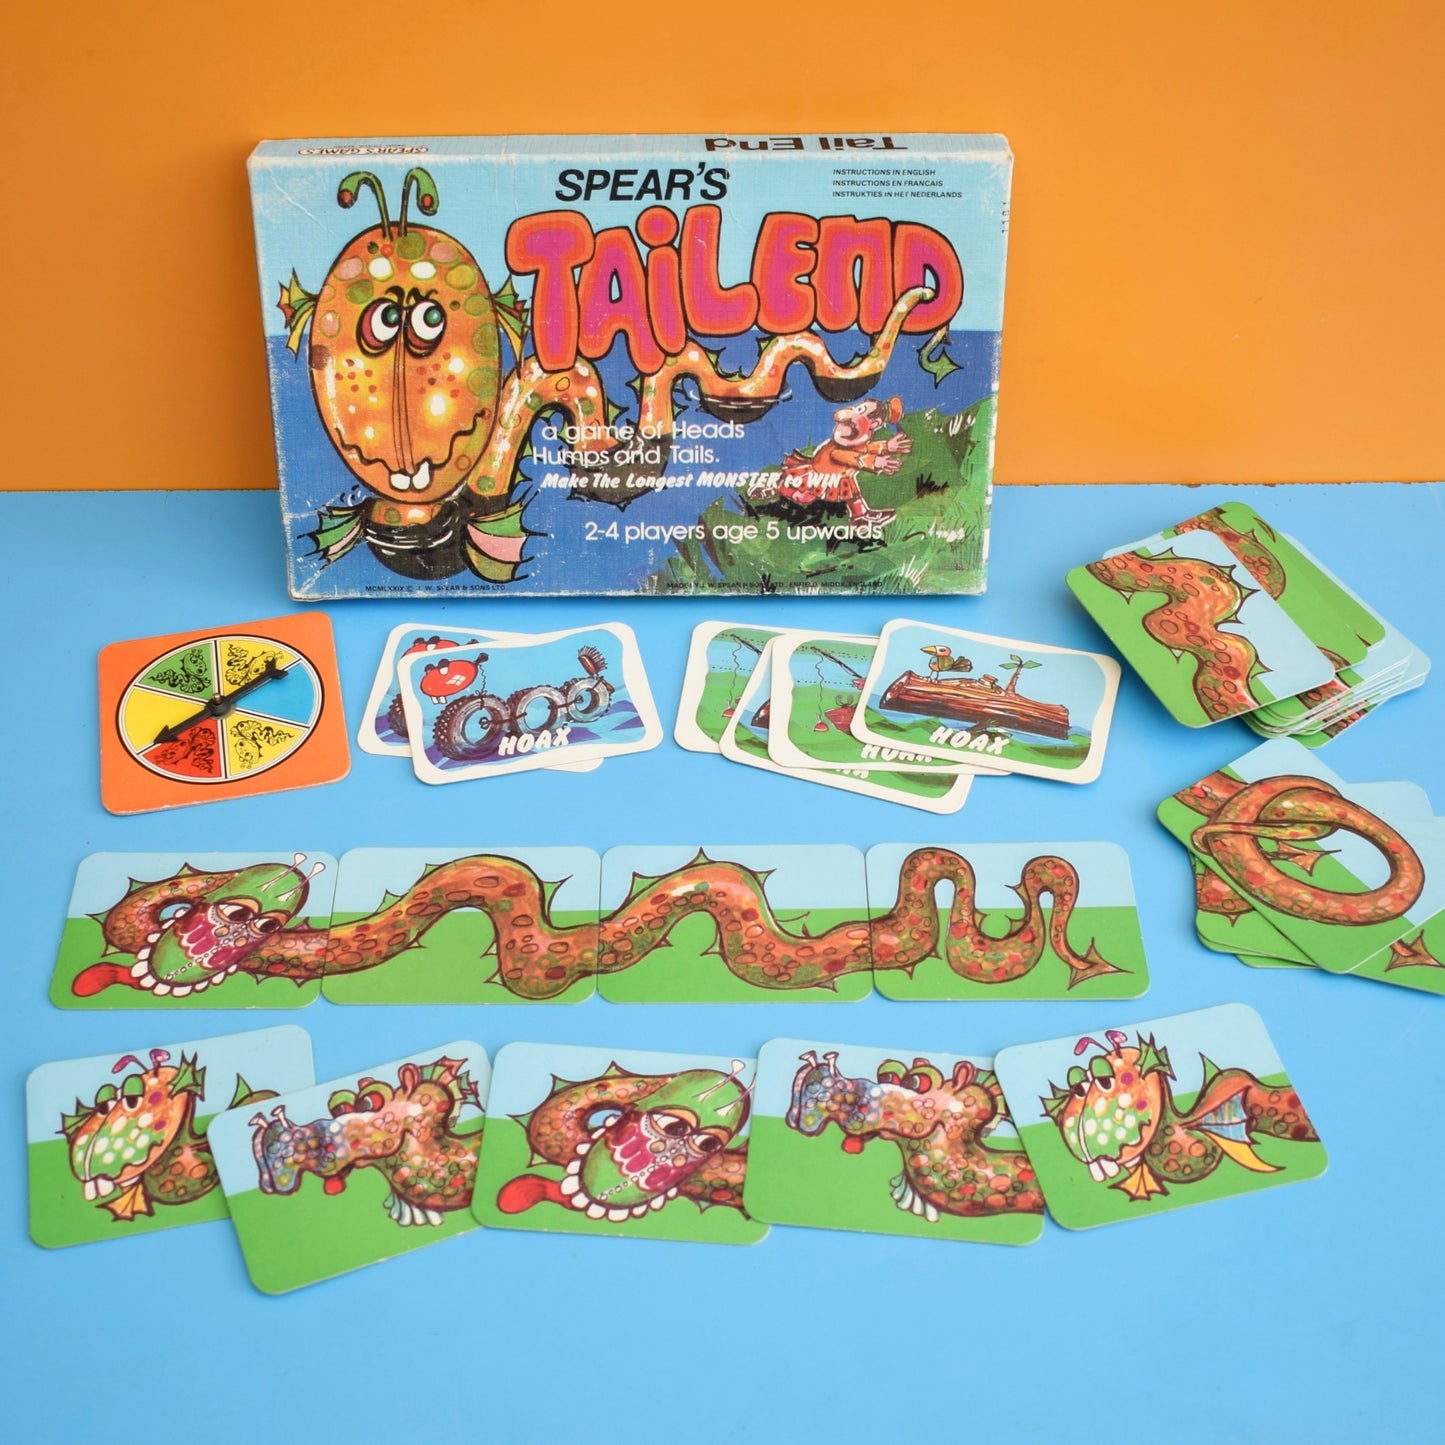 Vintage 1970s Spears Game - Tailend